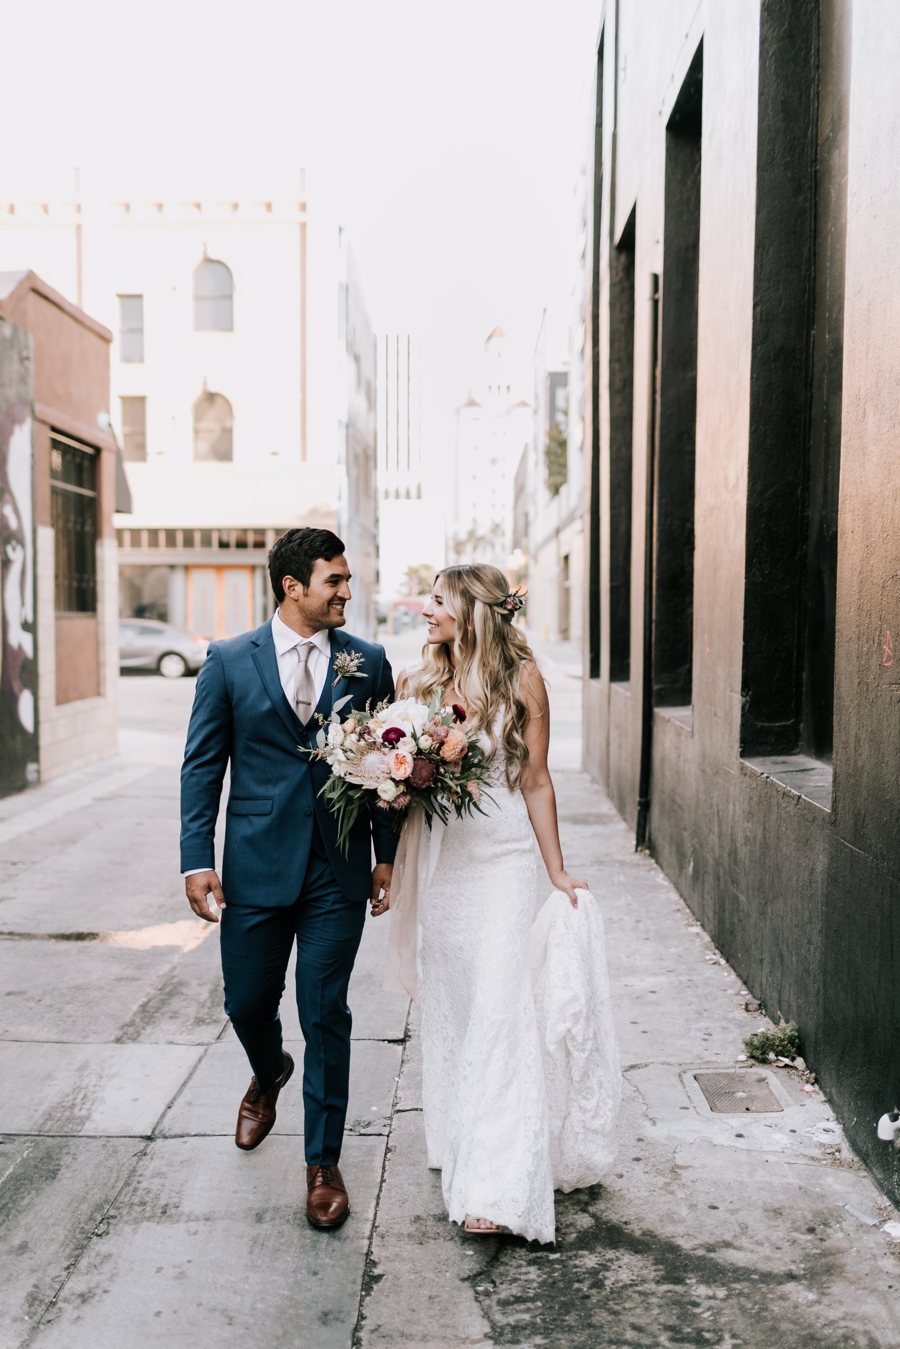 Brian + Taylor Loft On Pine Wedding - Michelle Lillywhite Photography